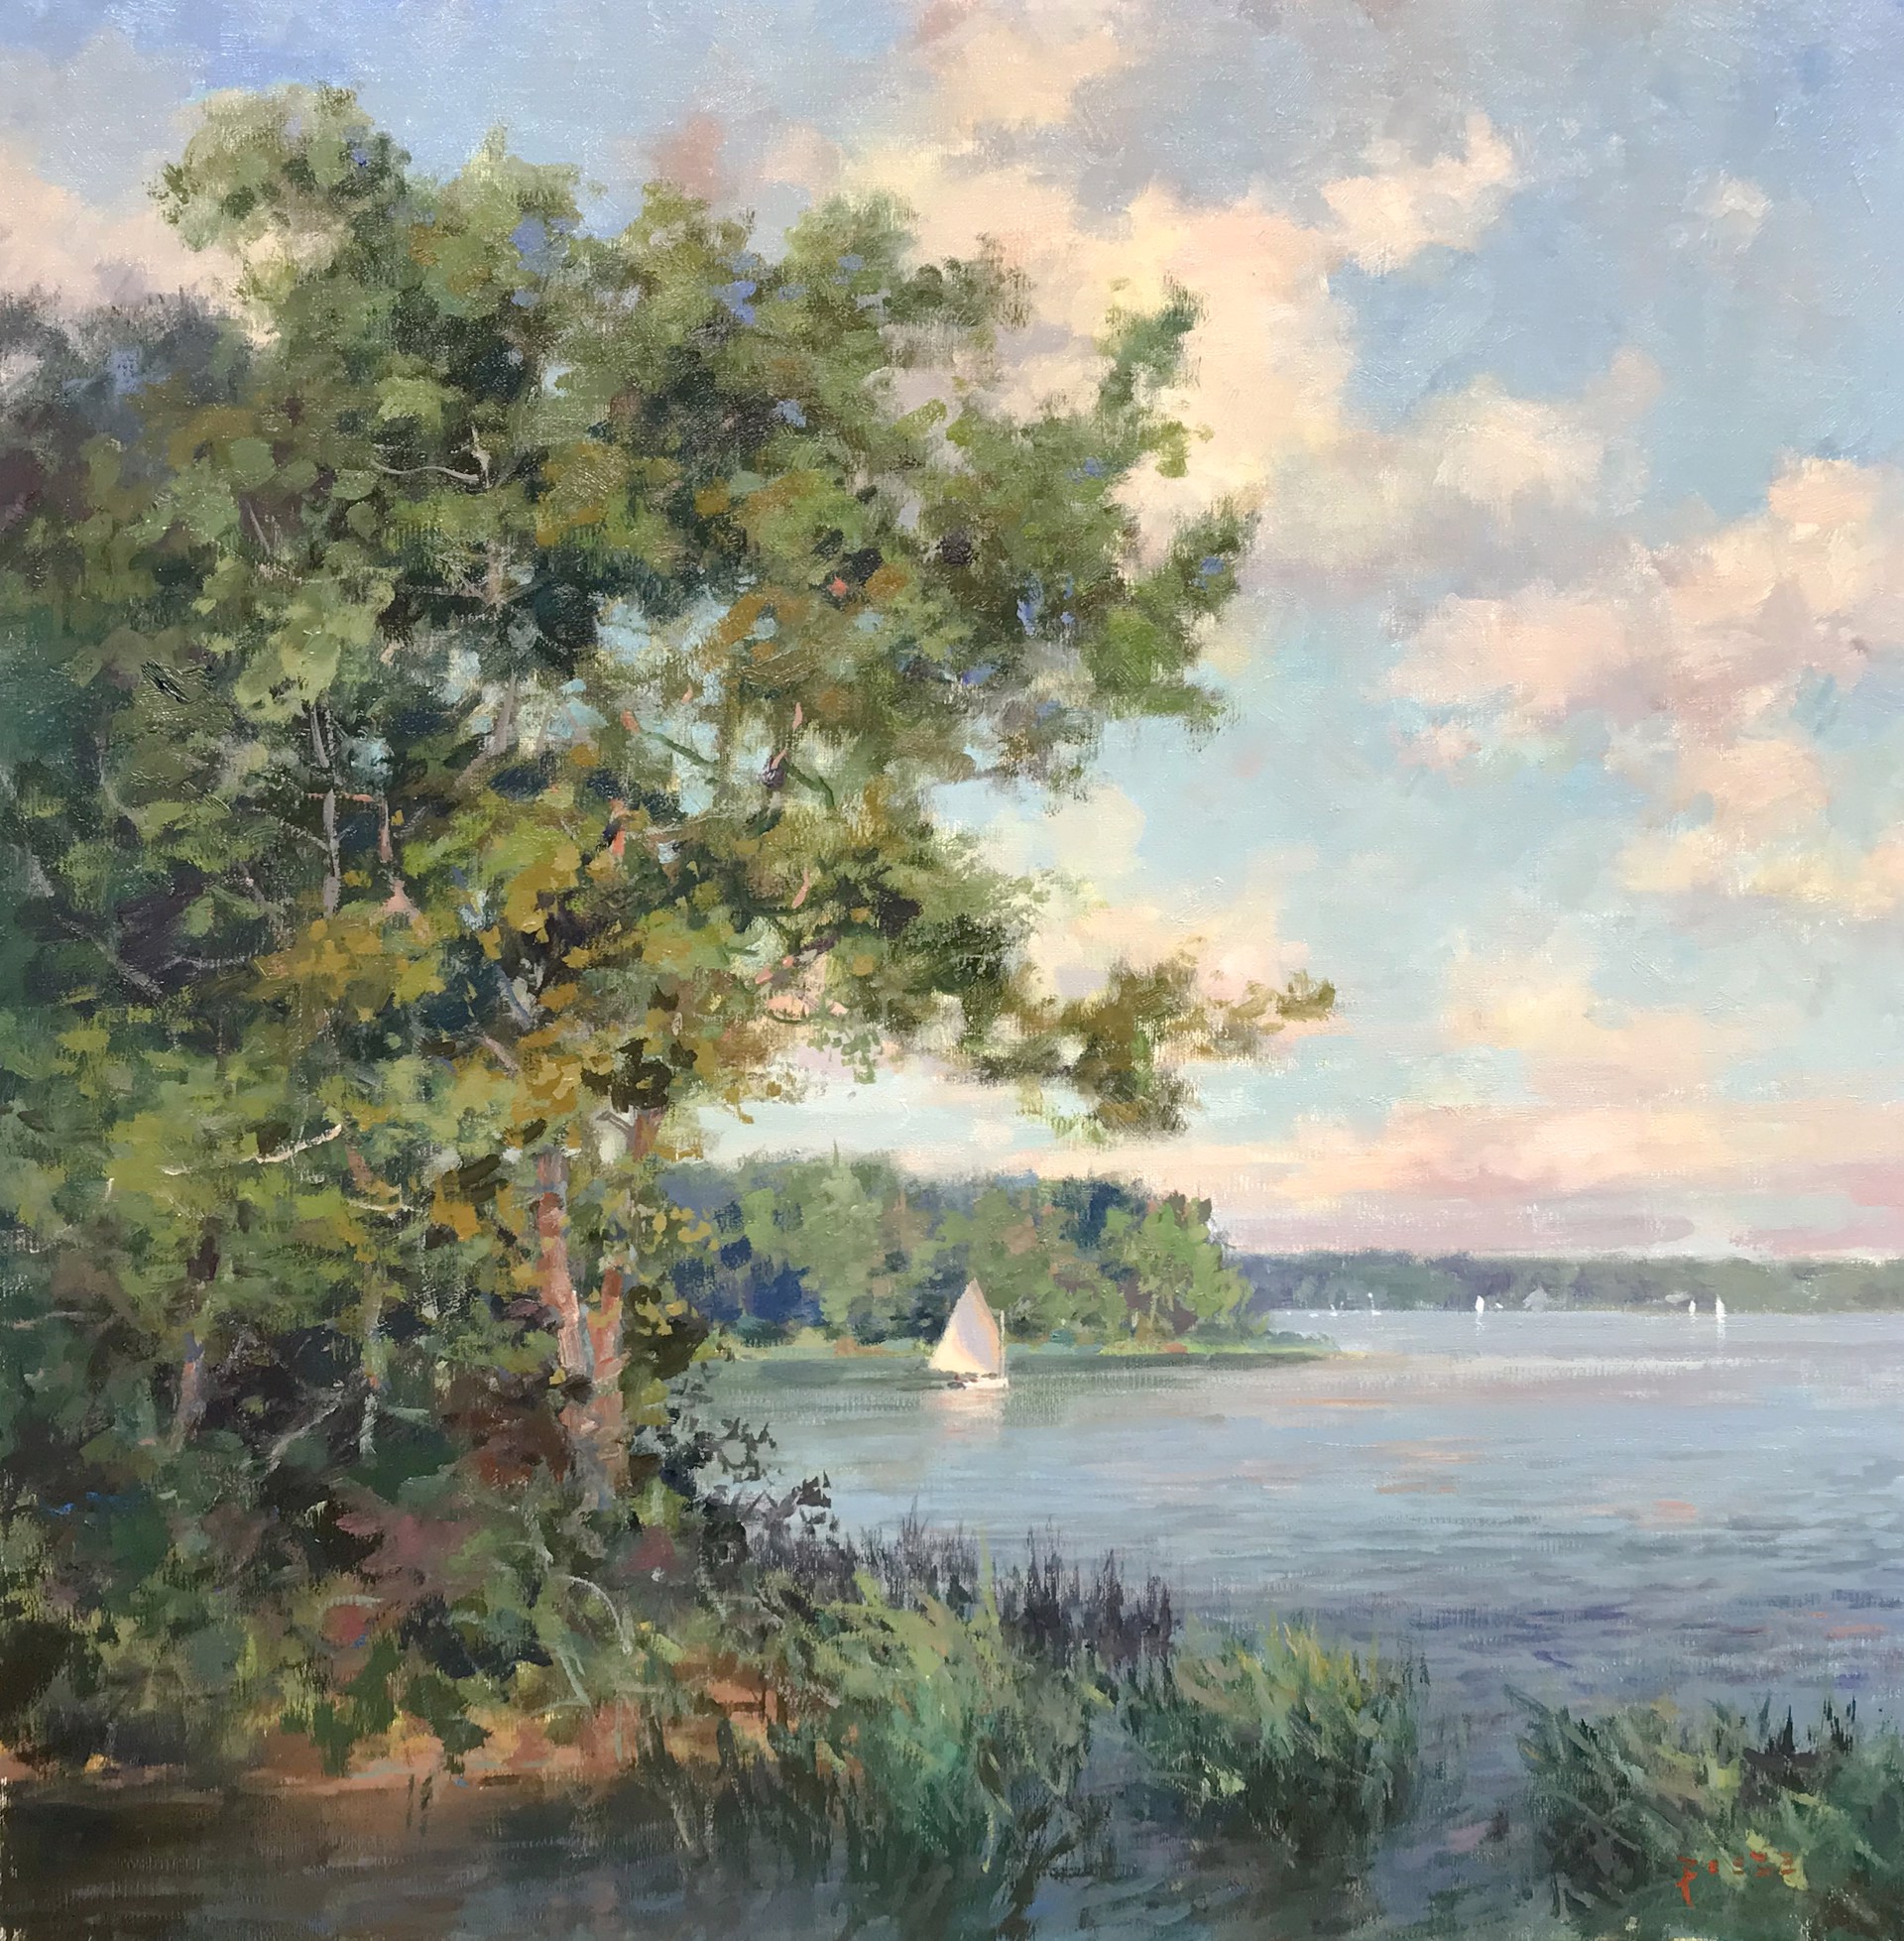 Early Fall on the CT River by Paul Beebe